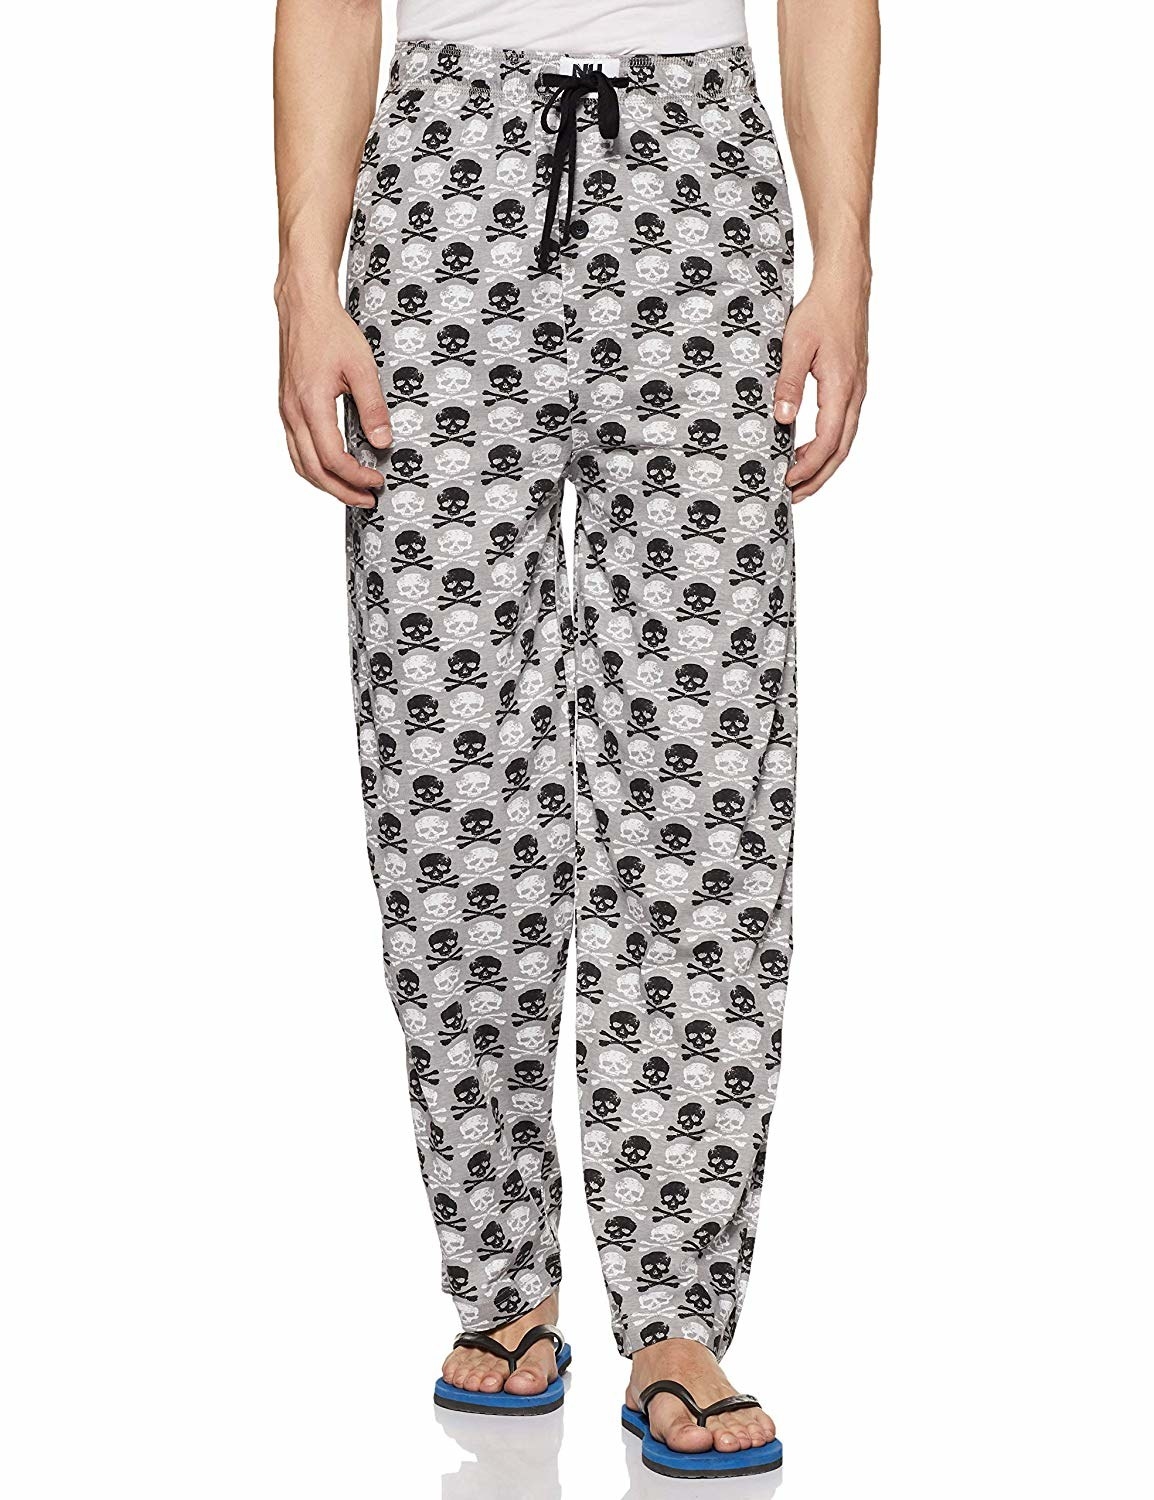 24 Comfortable PJs You Will Love